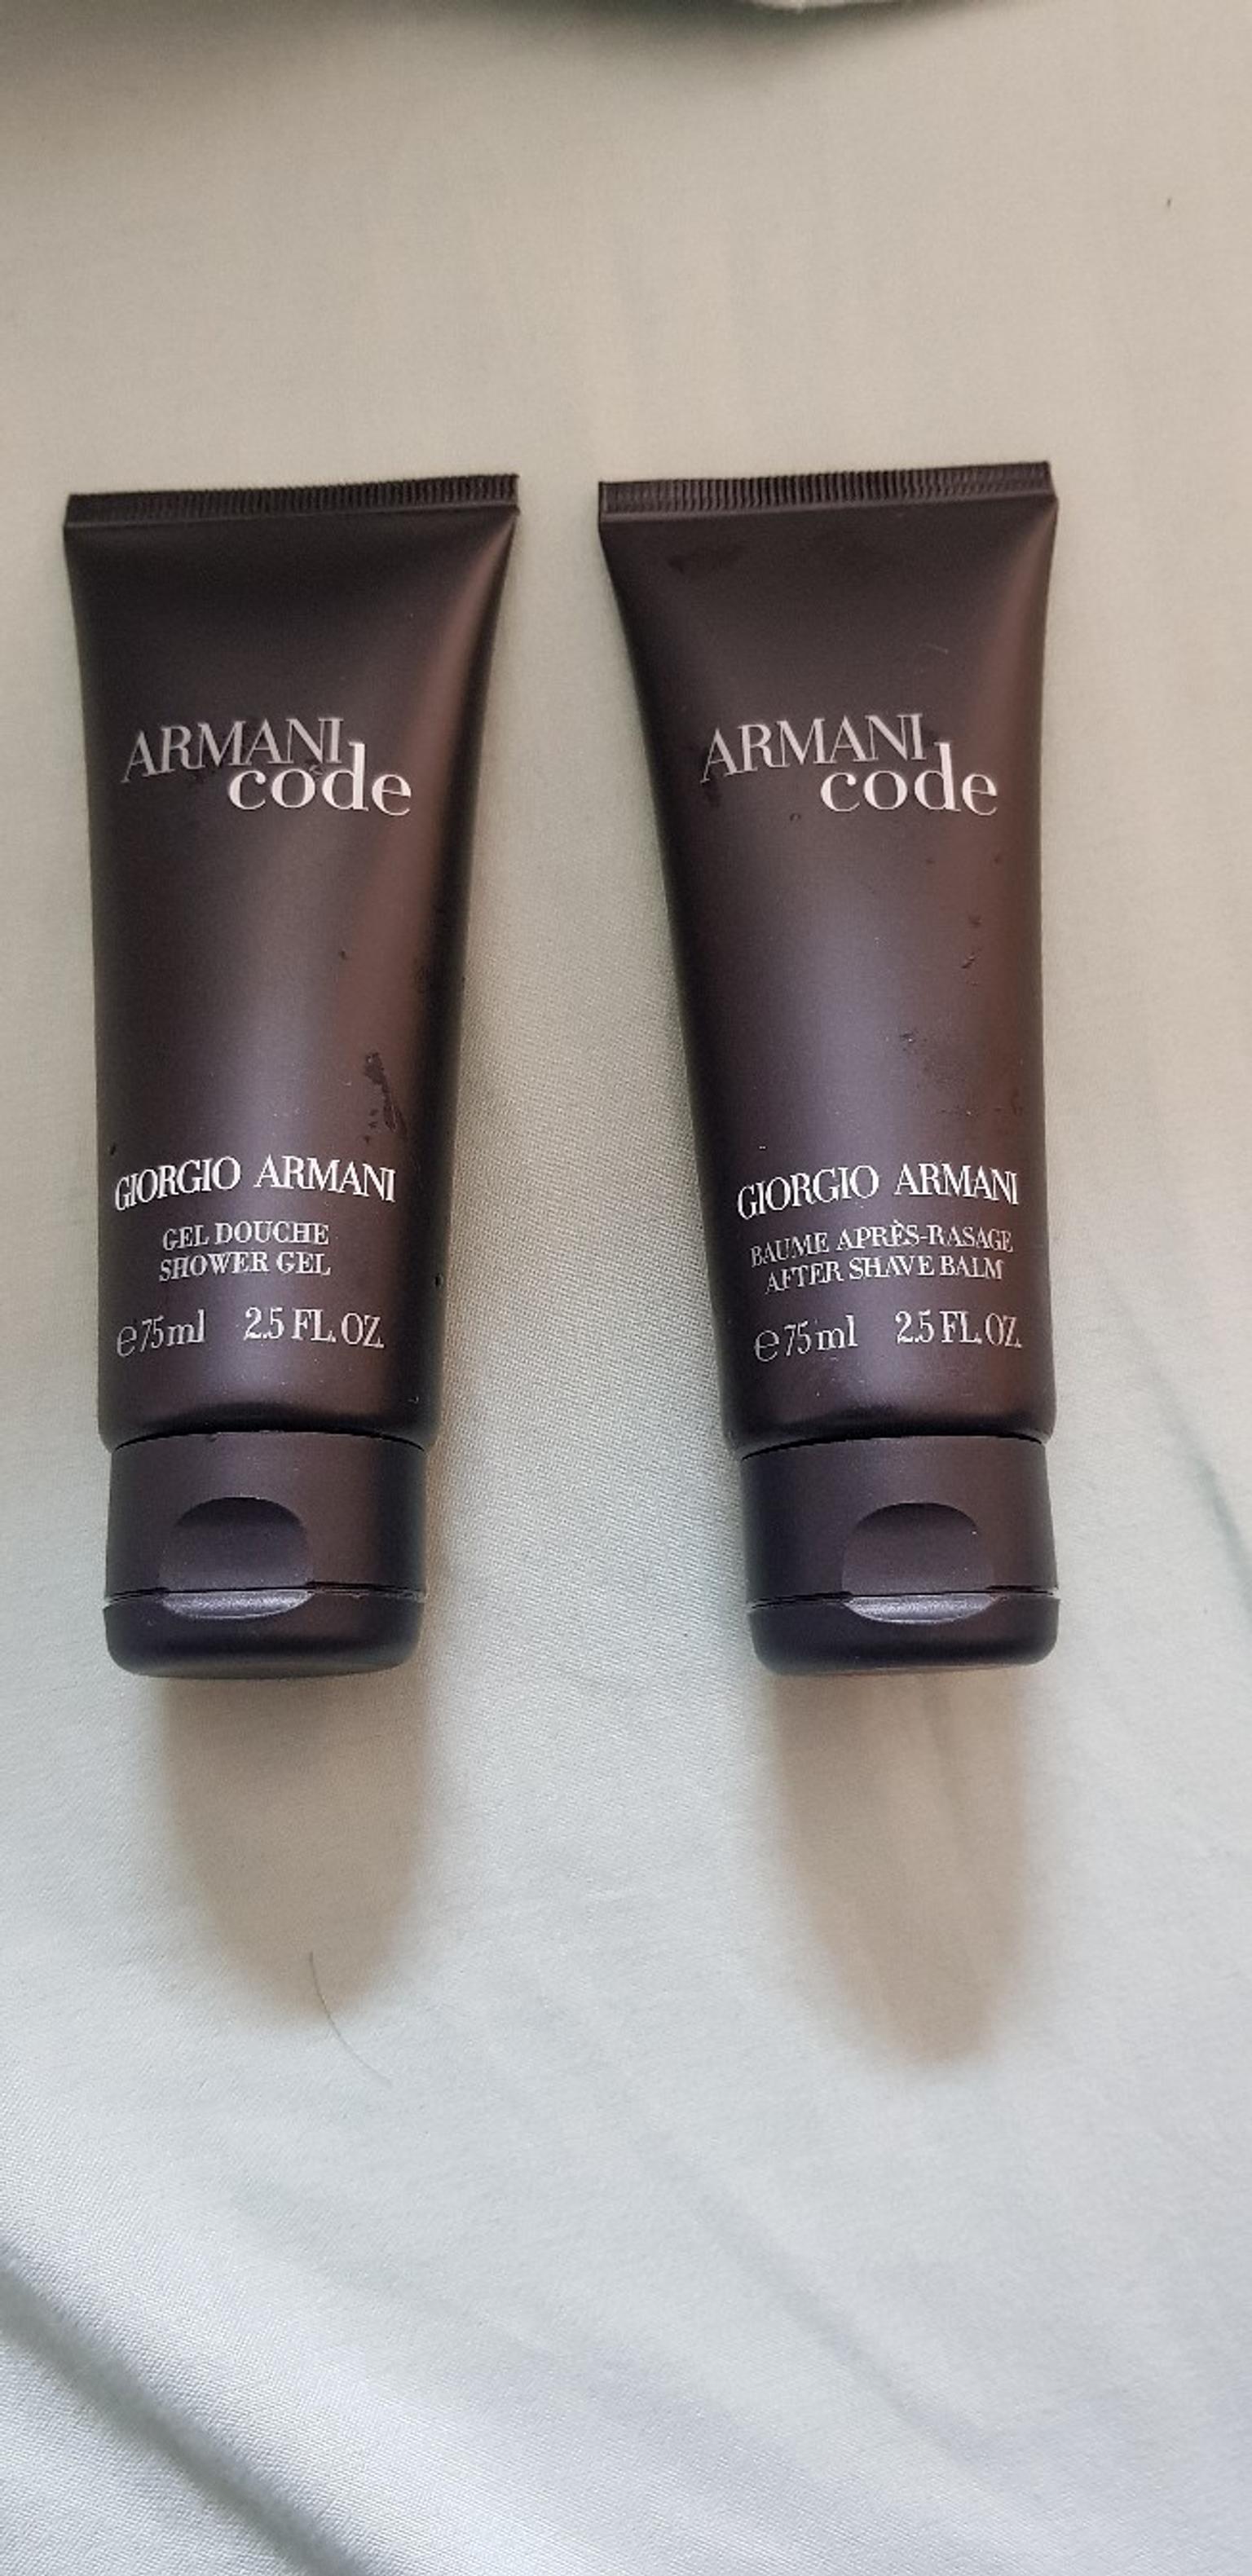 armani code aftershave balm 75ml